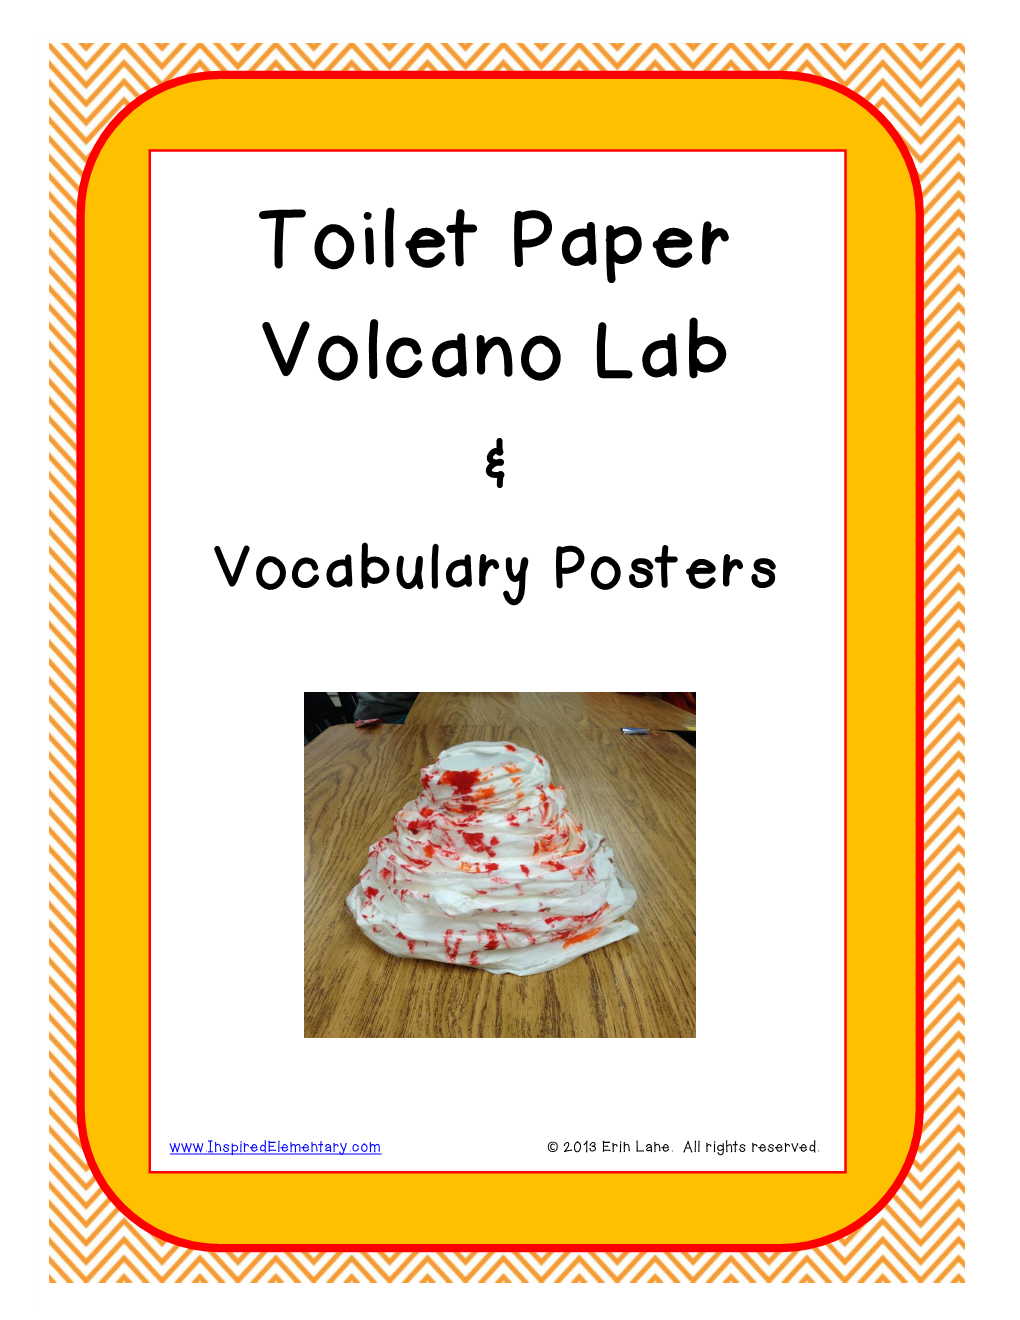 Toilet Paper Volcano Lab & Vocabulary Posters